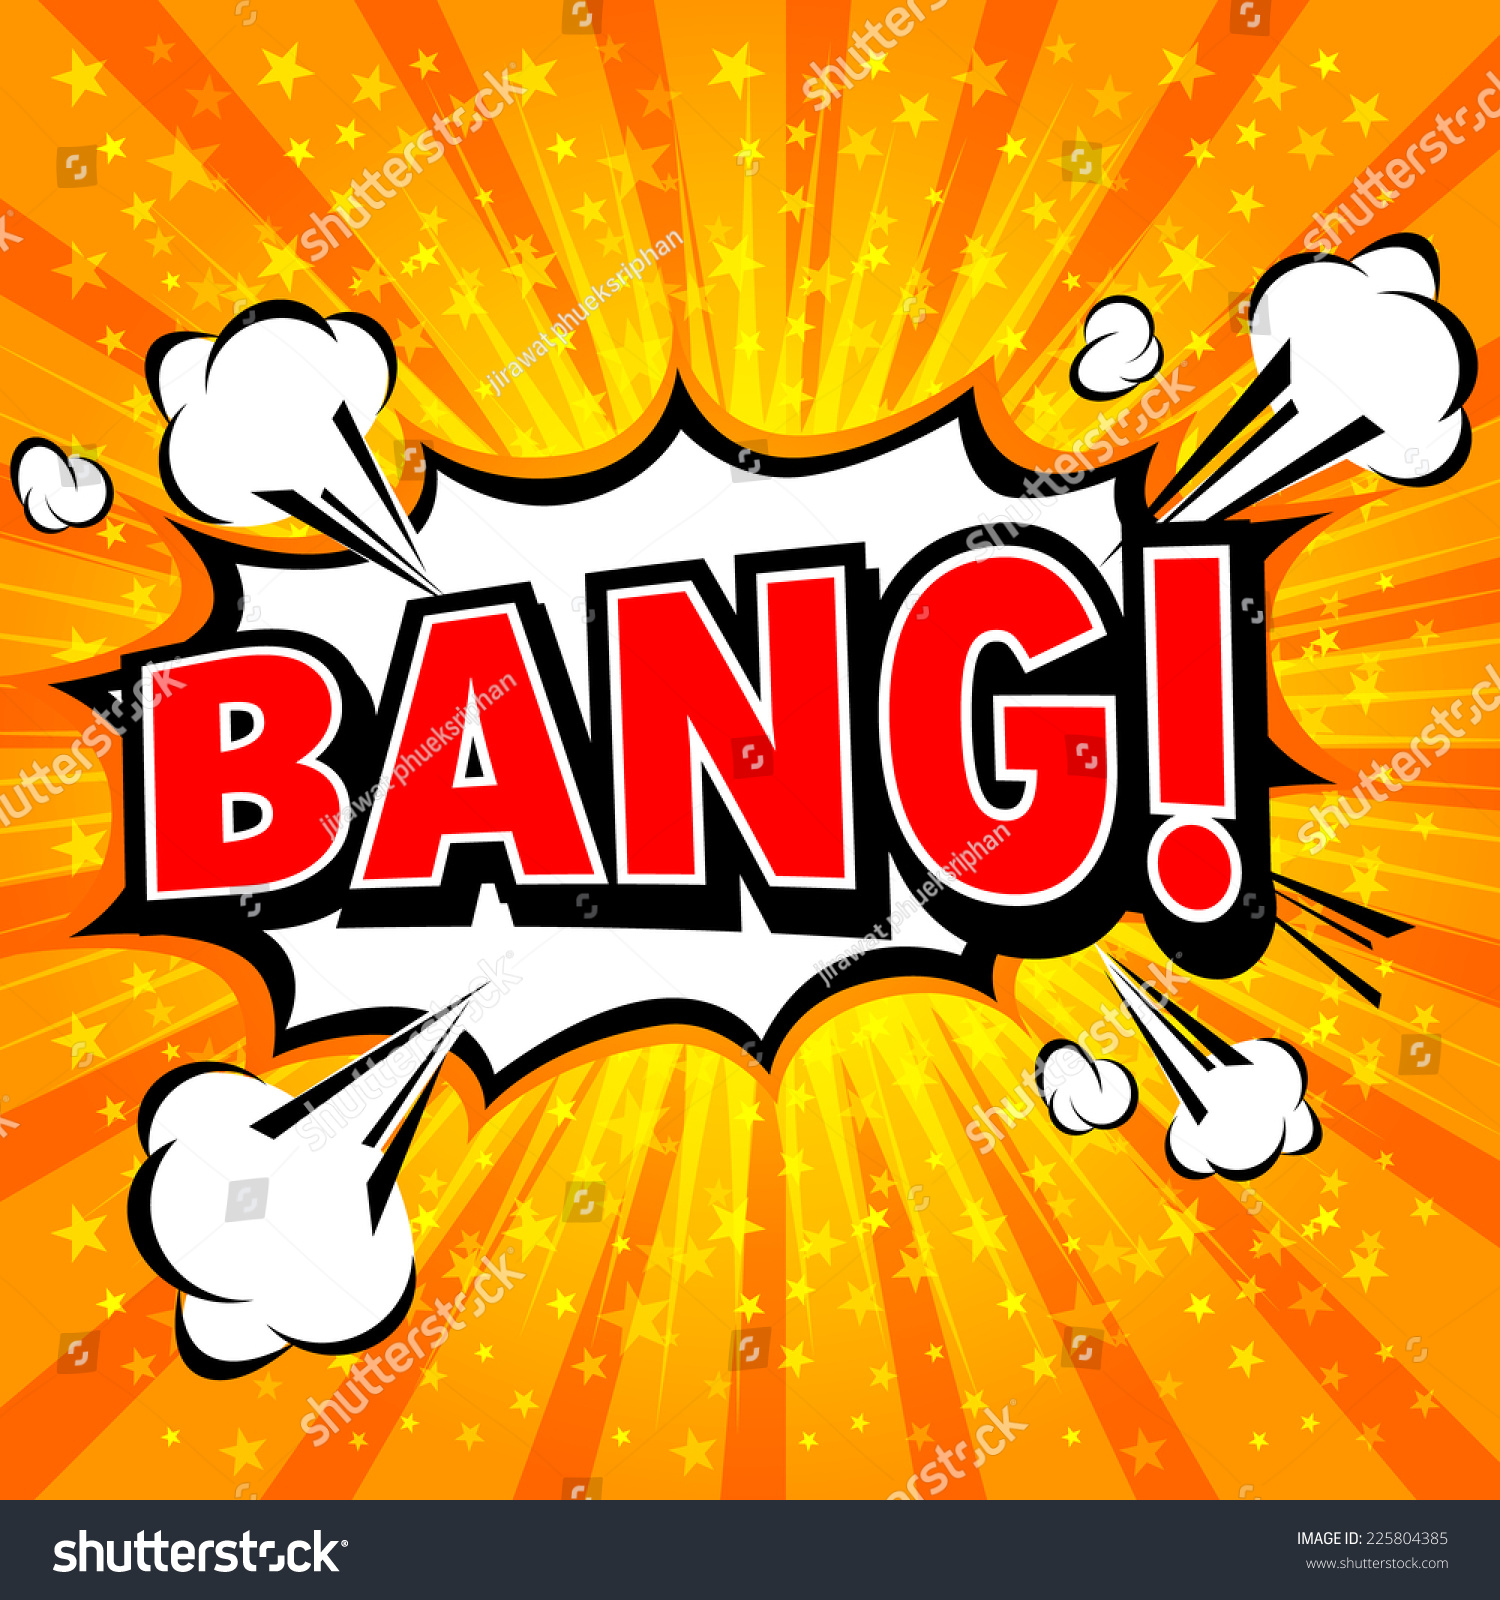 Bang background Images, Stock Photos & Vectors | Shutterstock